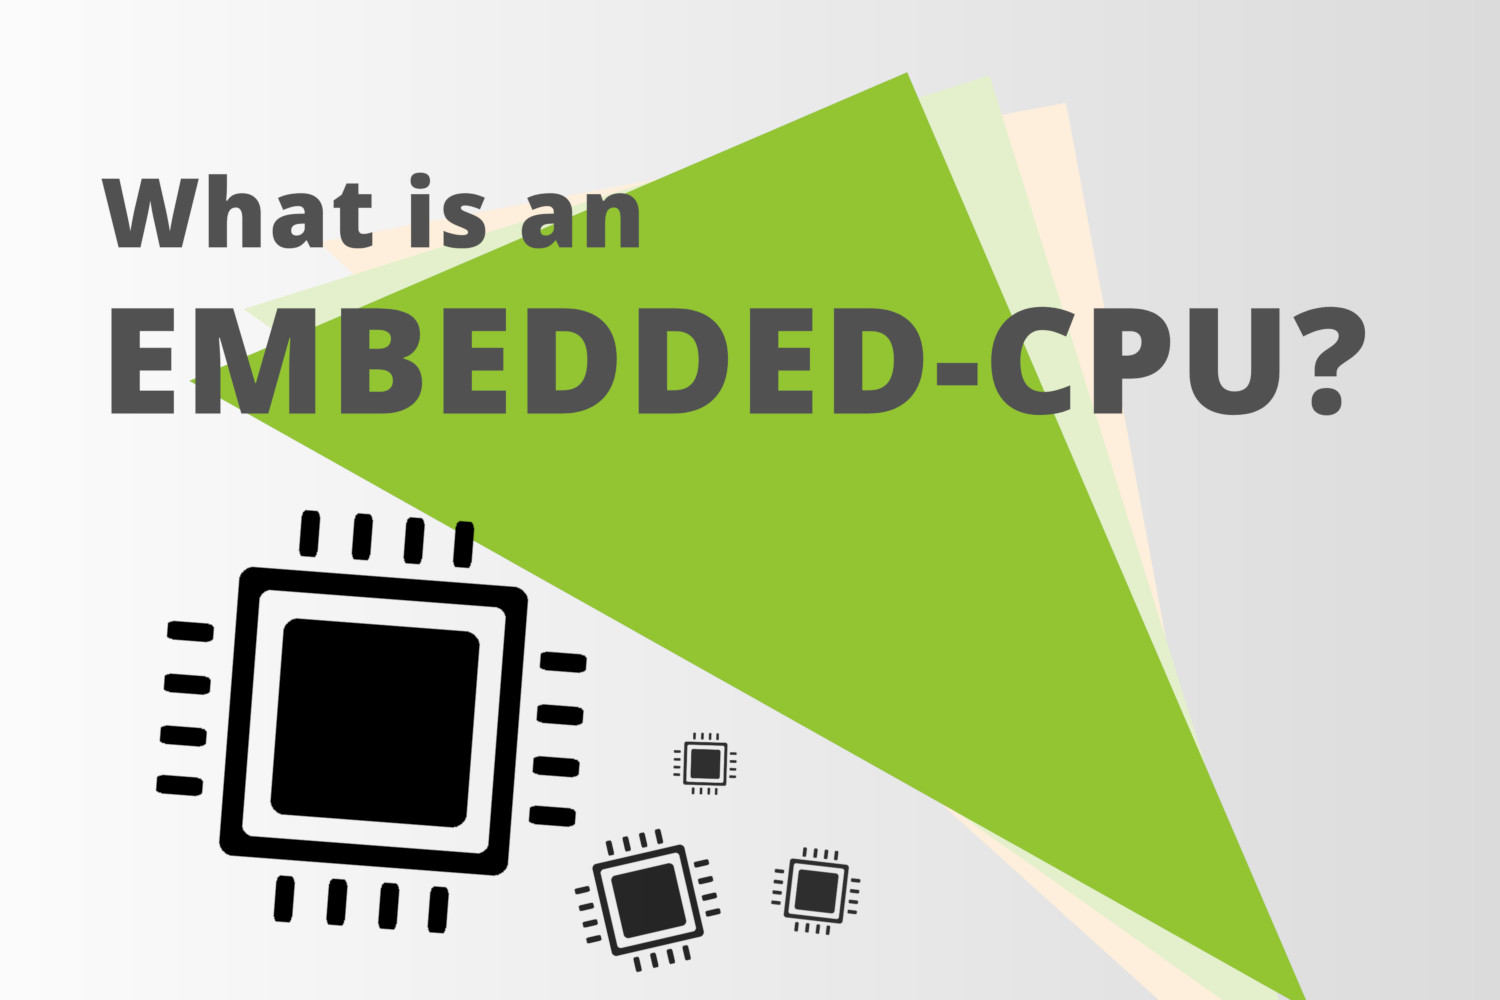 What is an Embedded-CPU?